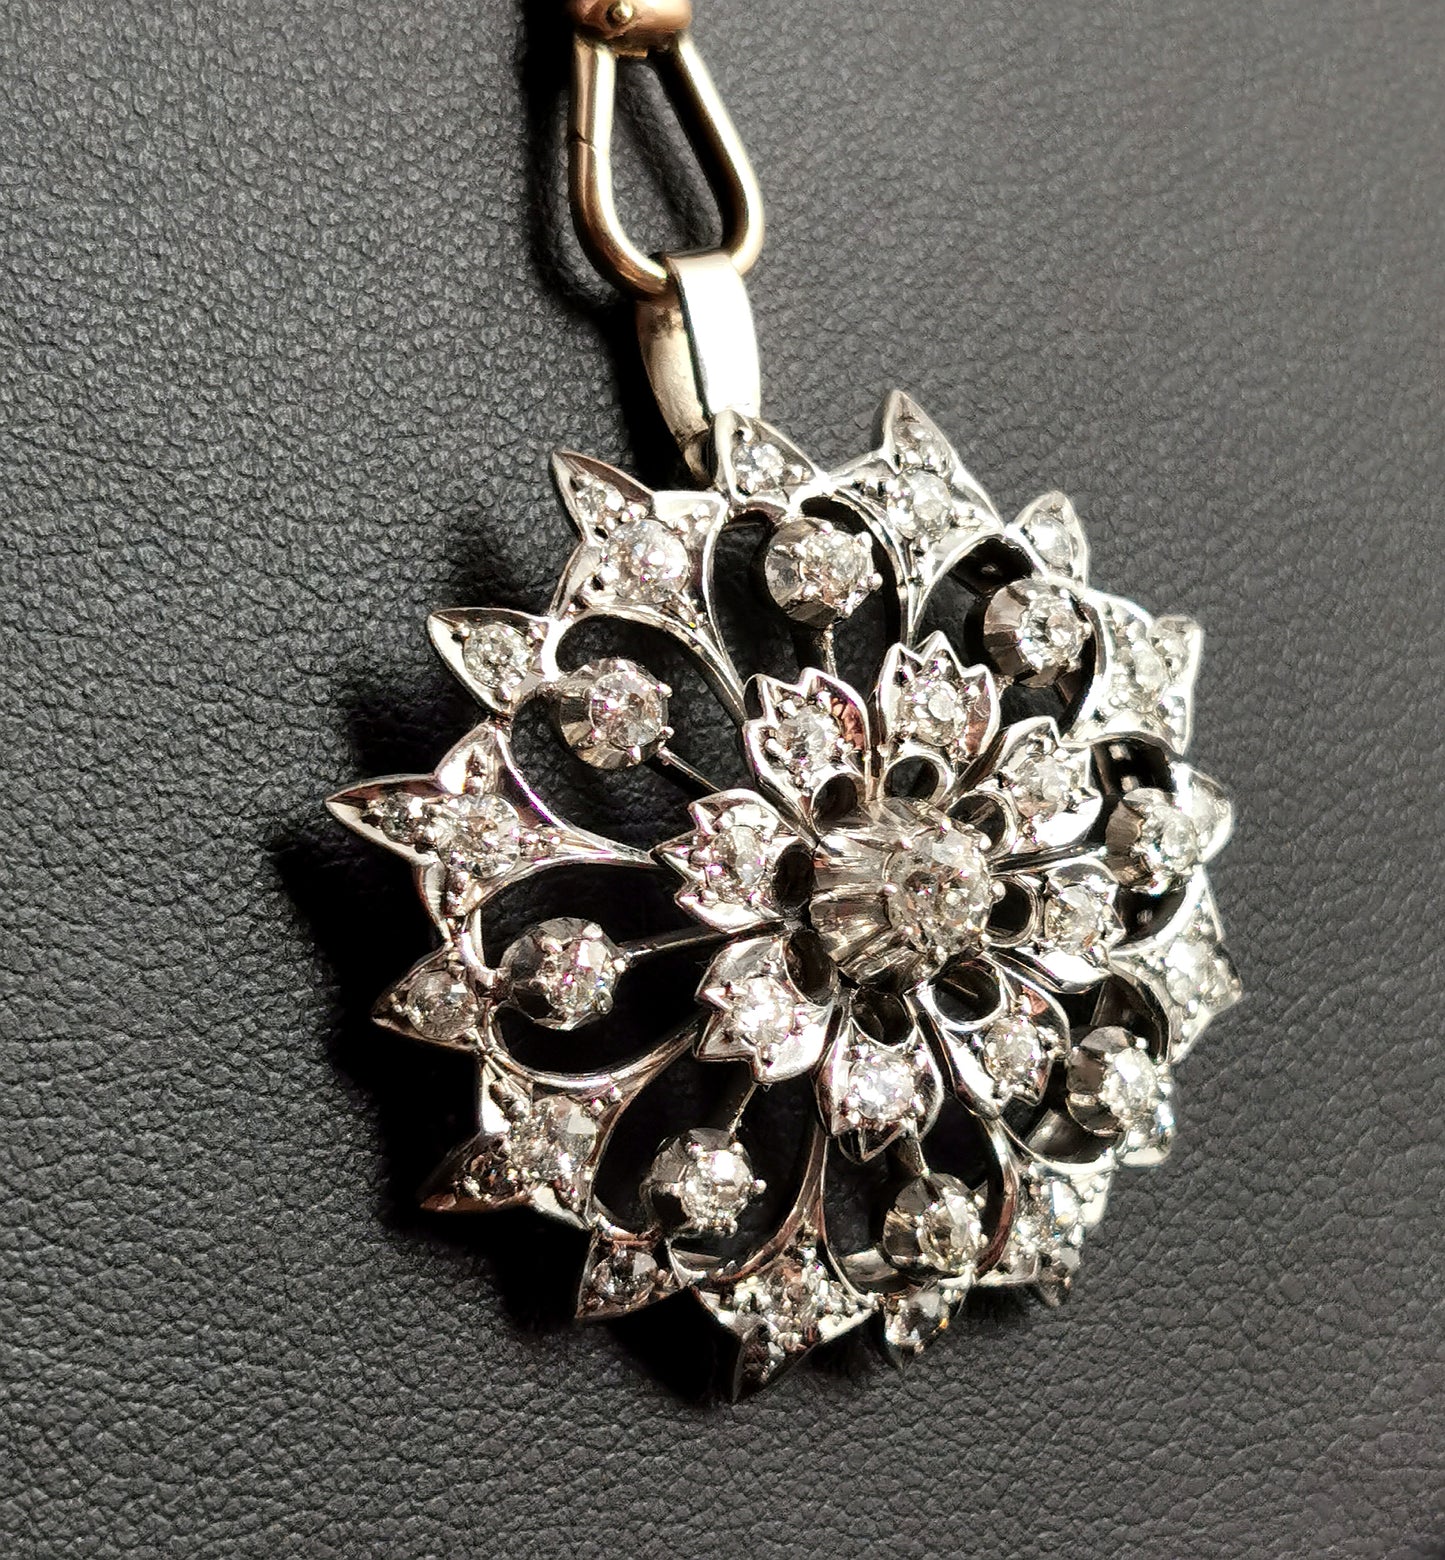 Antique Victorian Diamond flower pendant, 9ct gold and silver